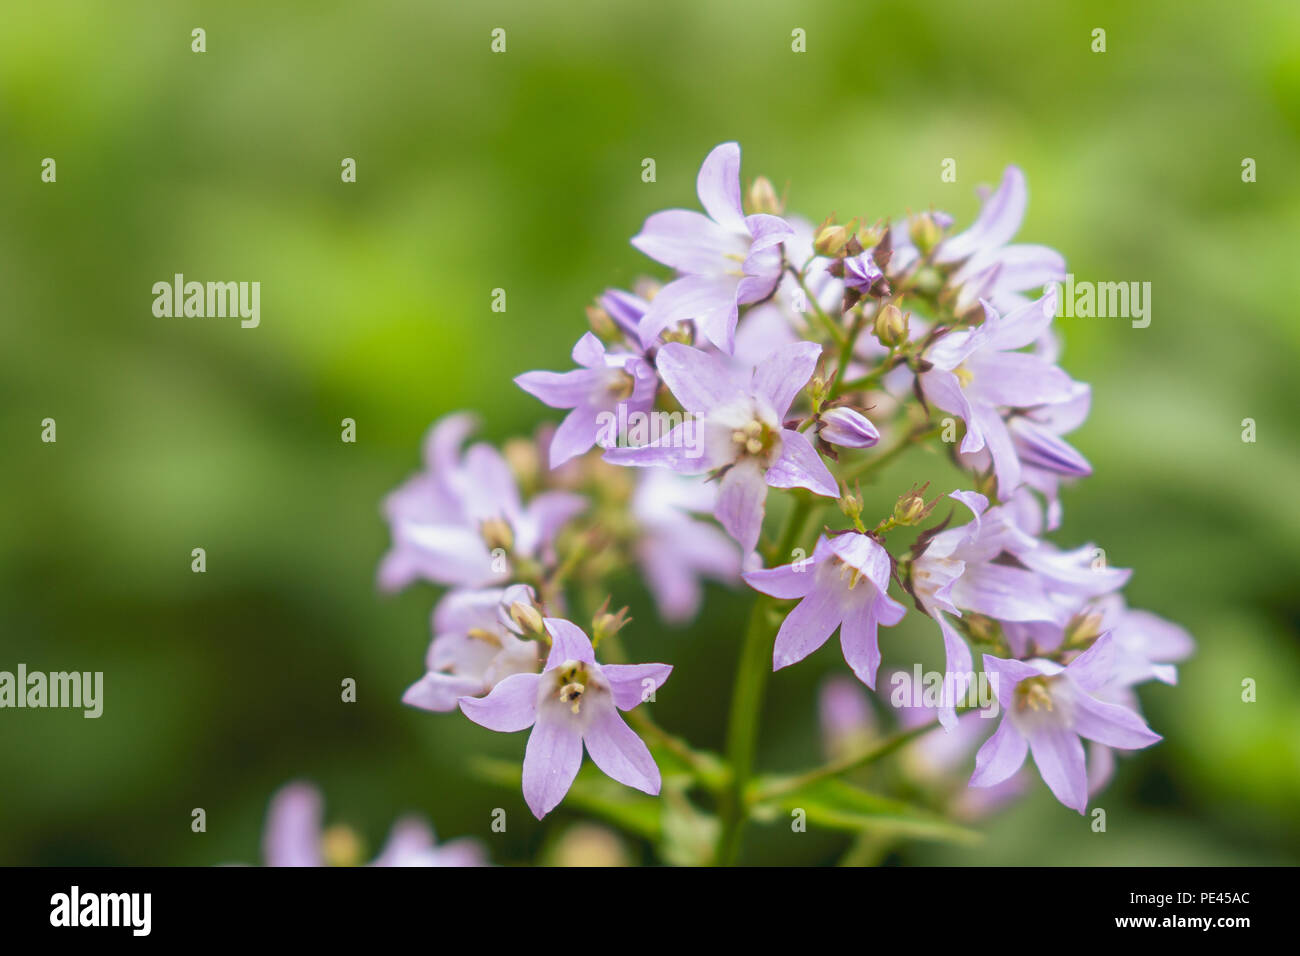 Beautiful purple blooming spring flowers. Nature concept Stock Photo